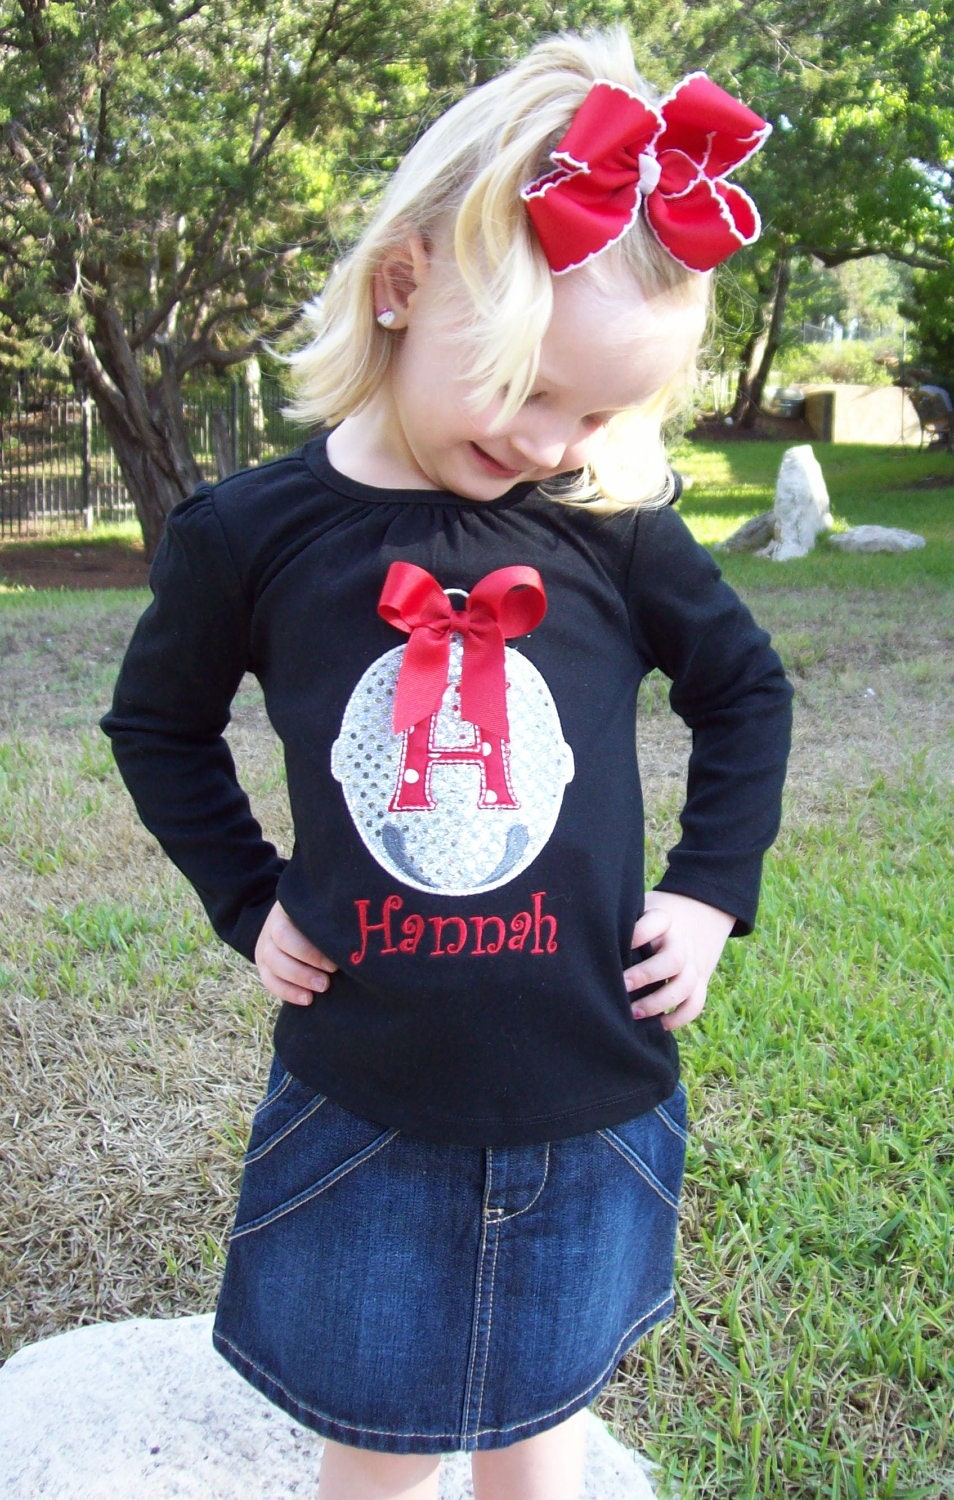 Girl's Jingle Bell Personalized Initial Appliqued Tee, Jingle Bell Tshirt, Christmas Bell Tshirt, Polar Express Christmas Tshirt